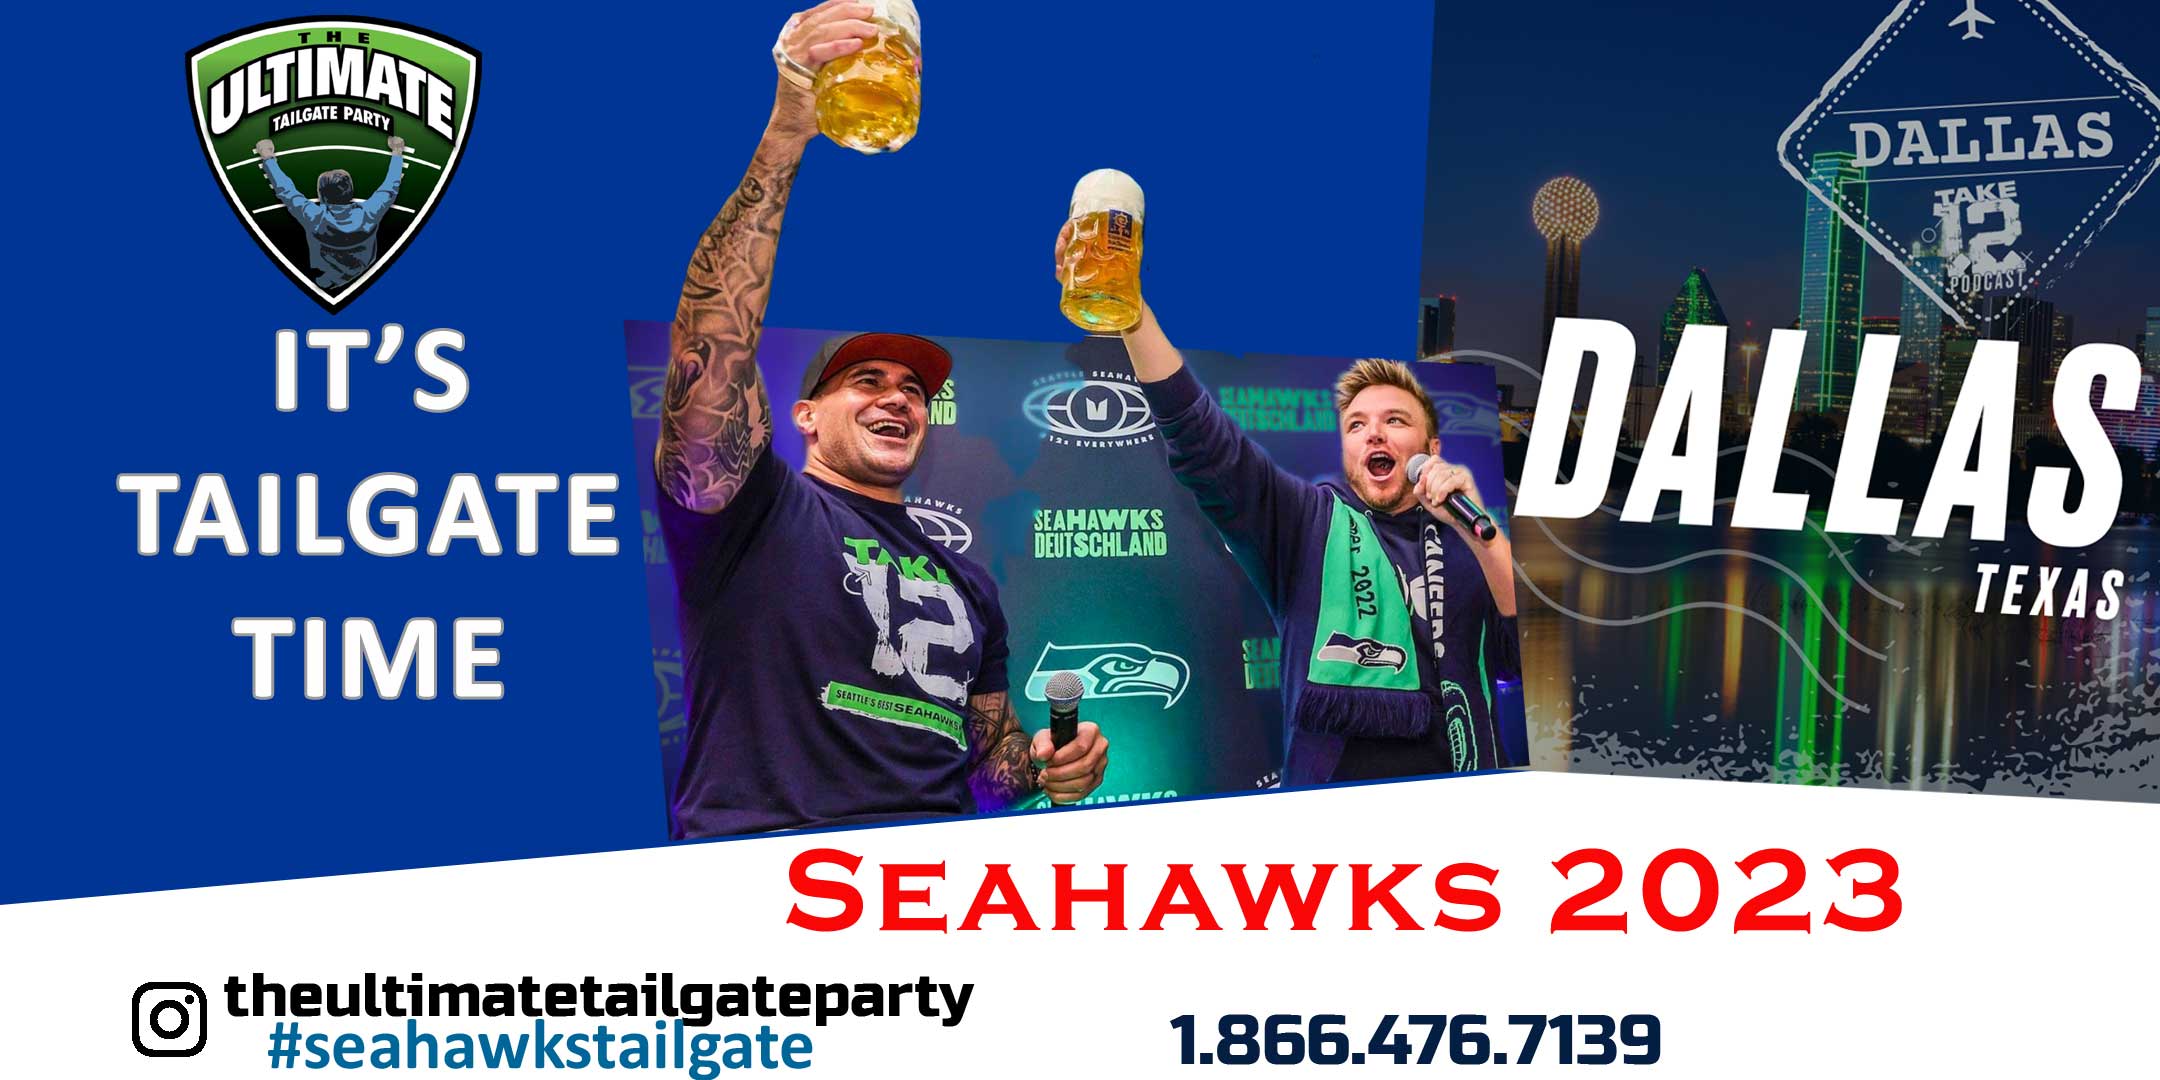 The Best Seahawks Tailgate 2023